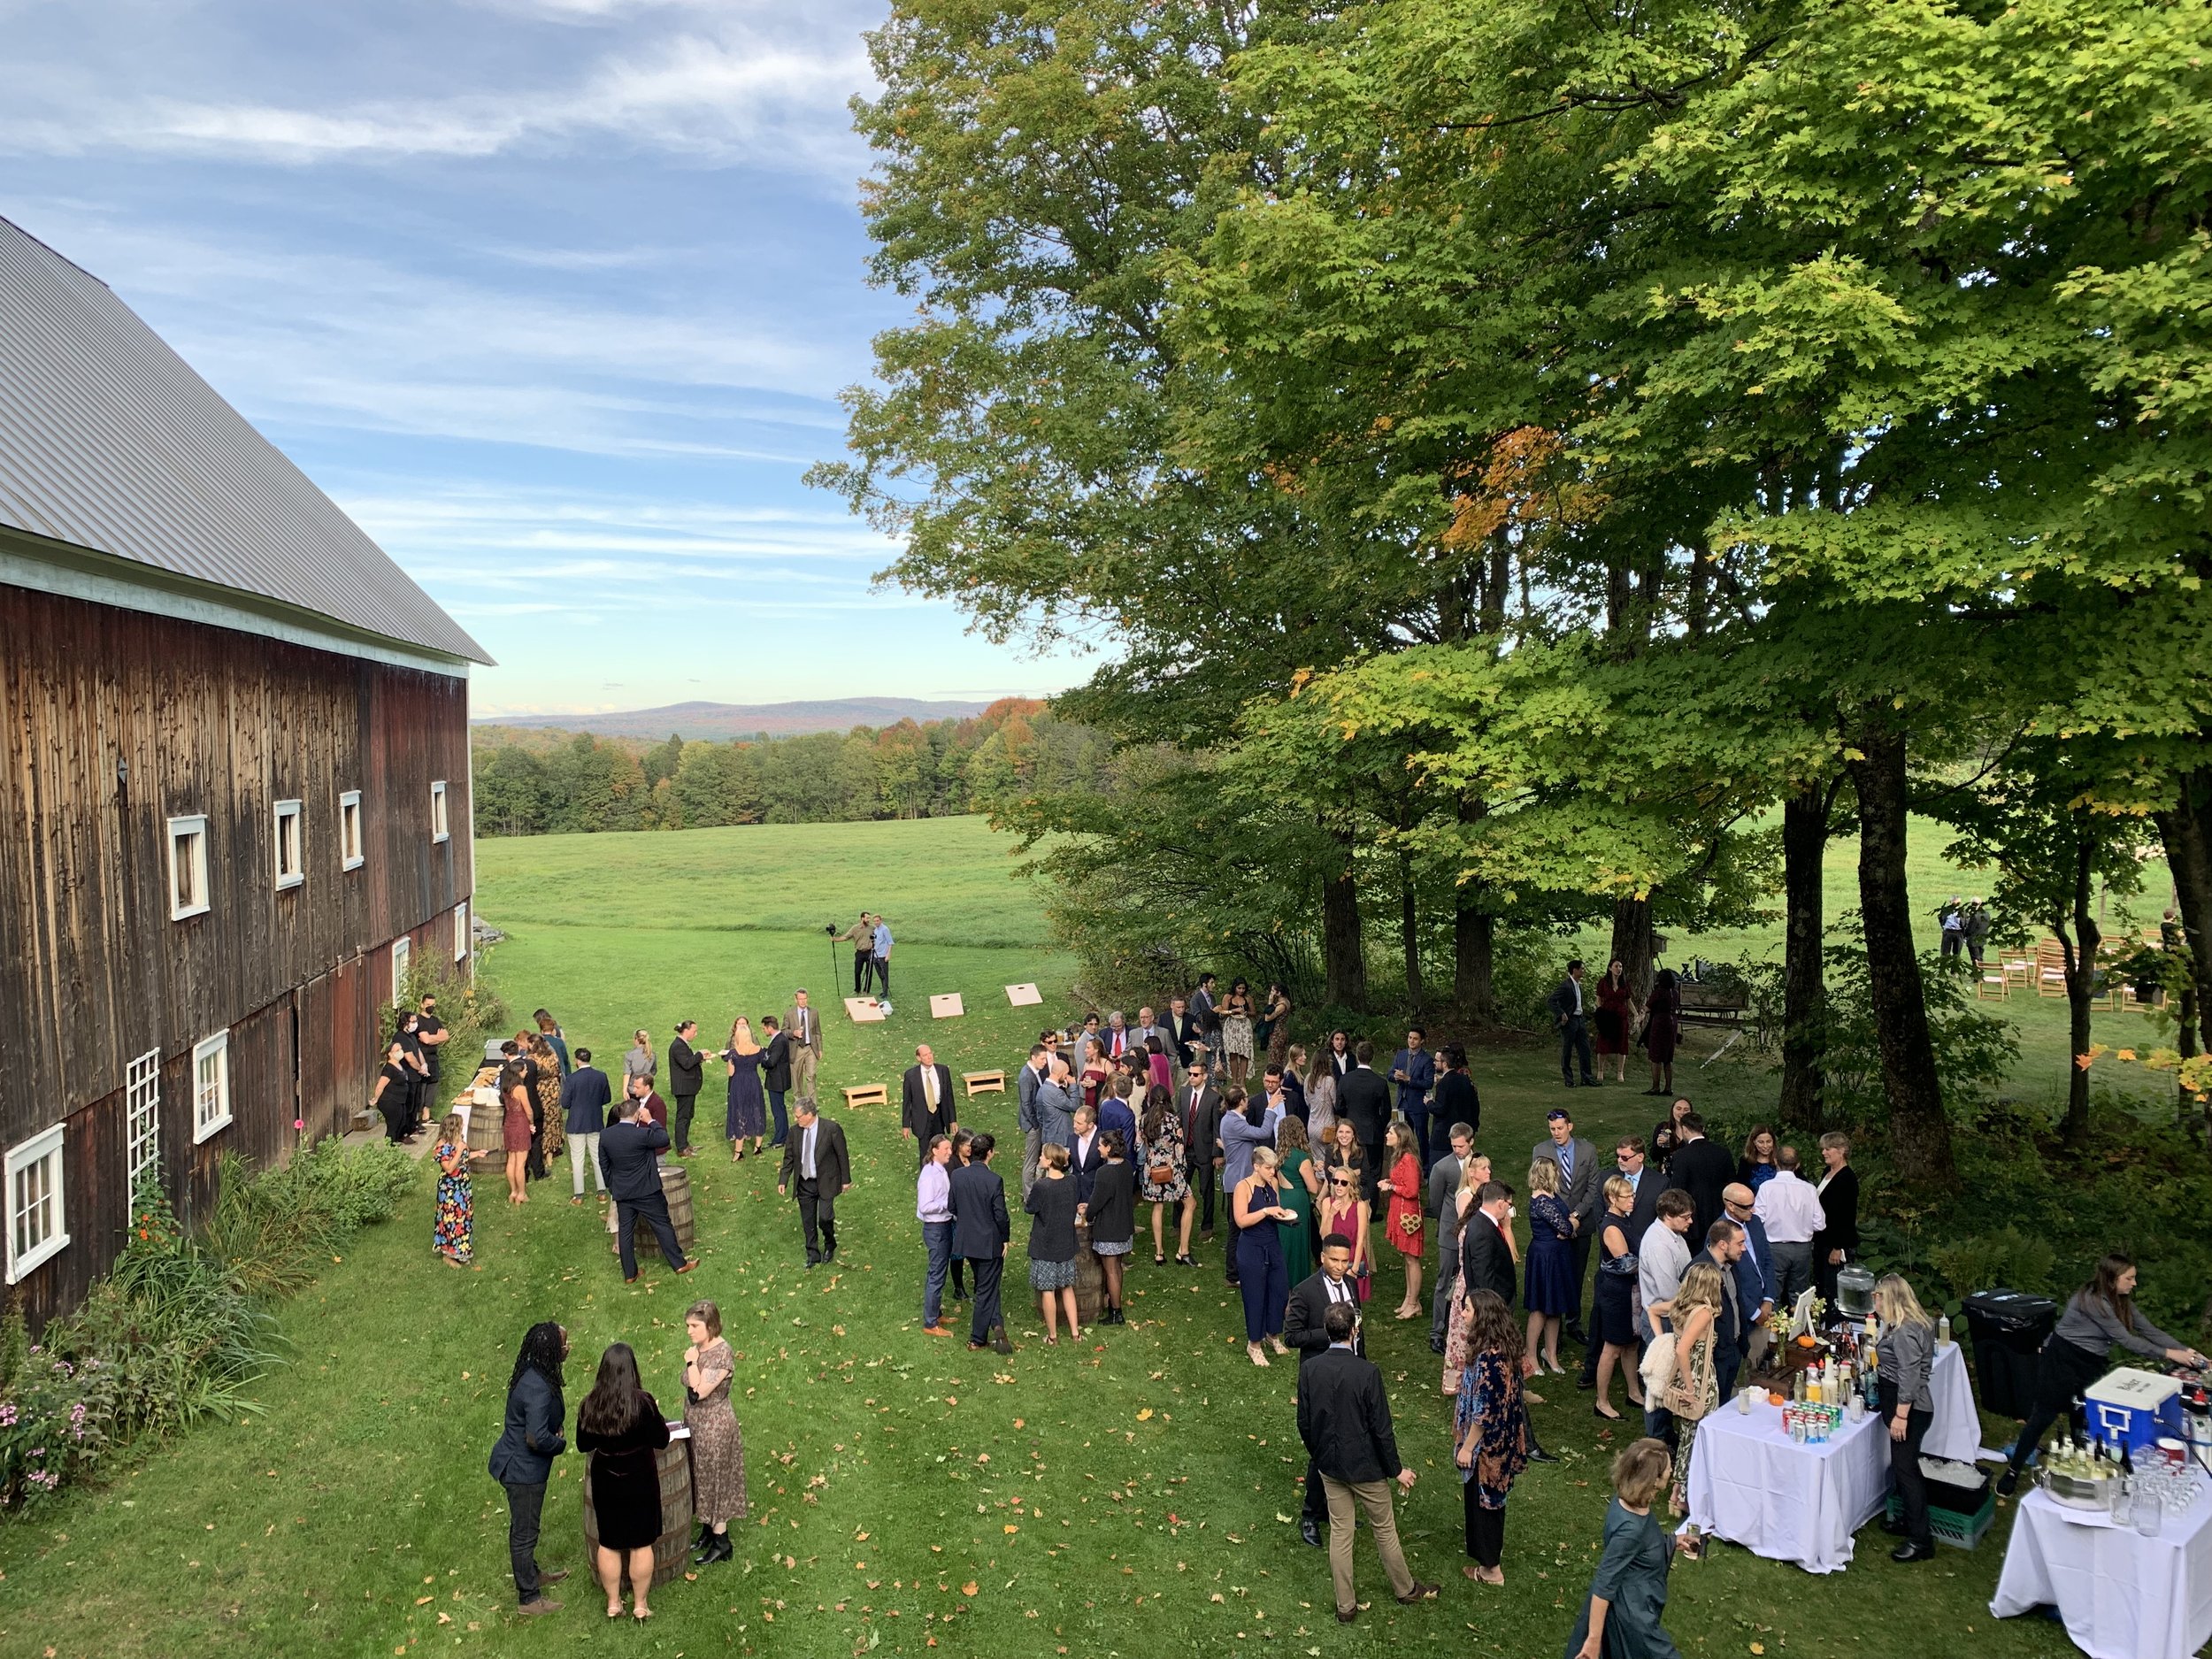 Wedding guests celebrating outside on a sunny day outside of a rustic barn